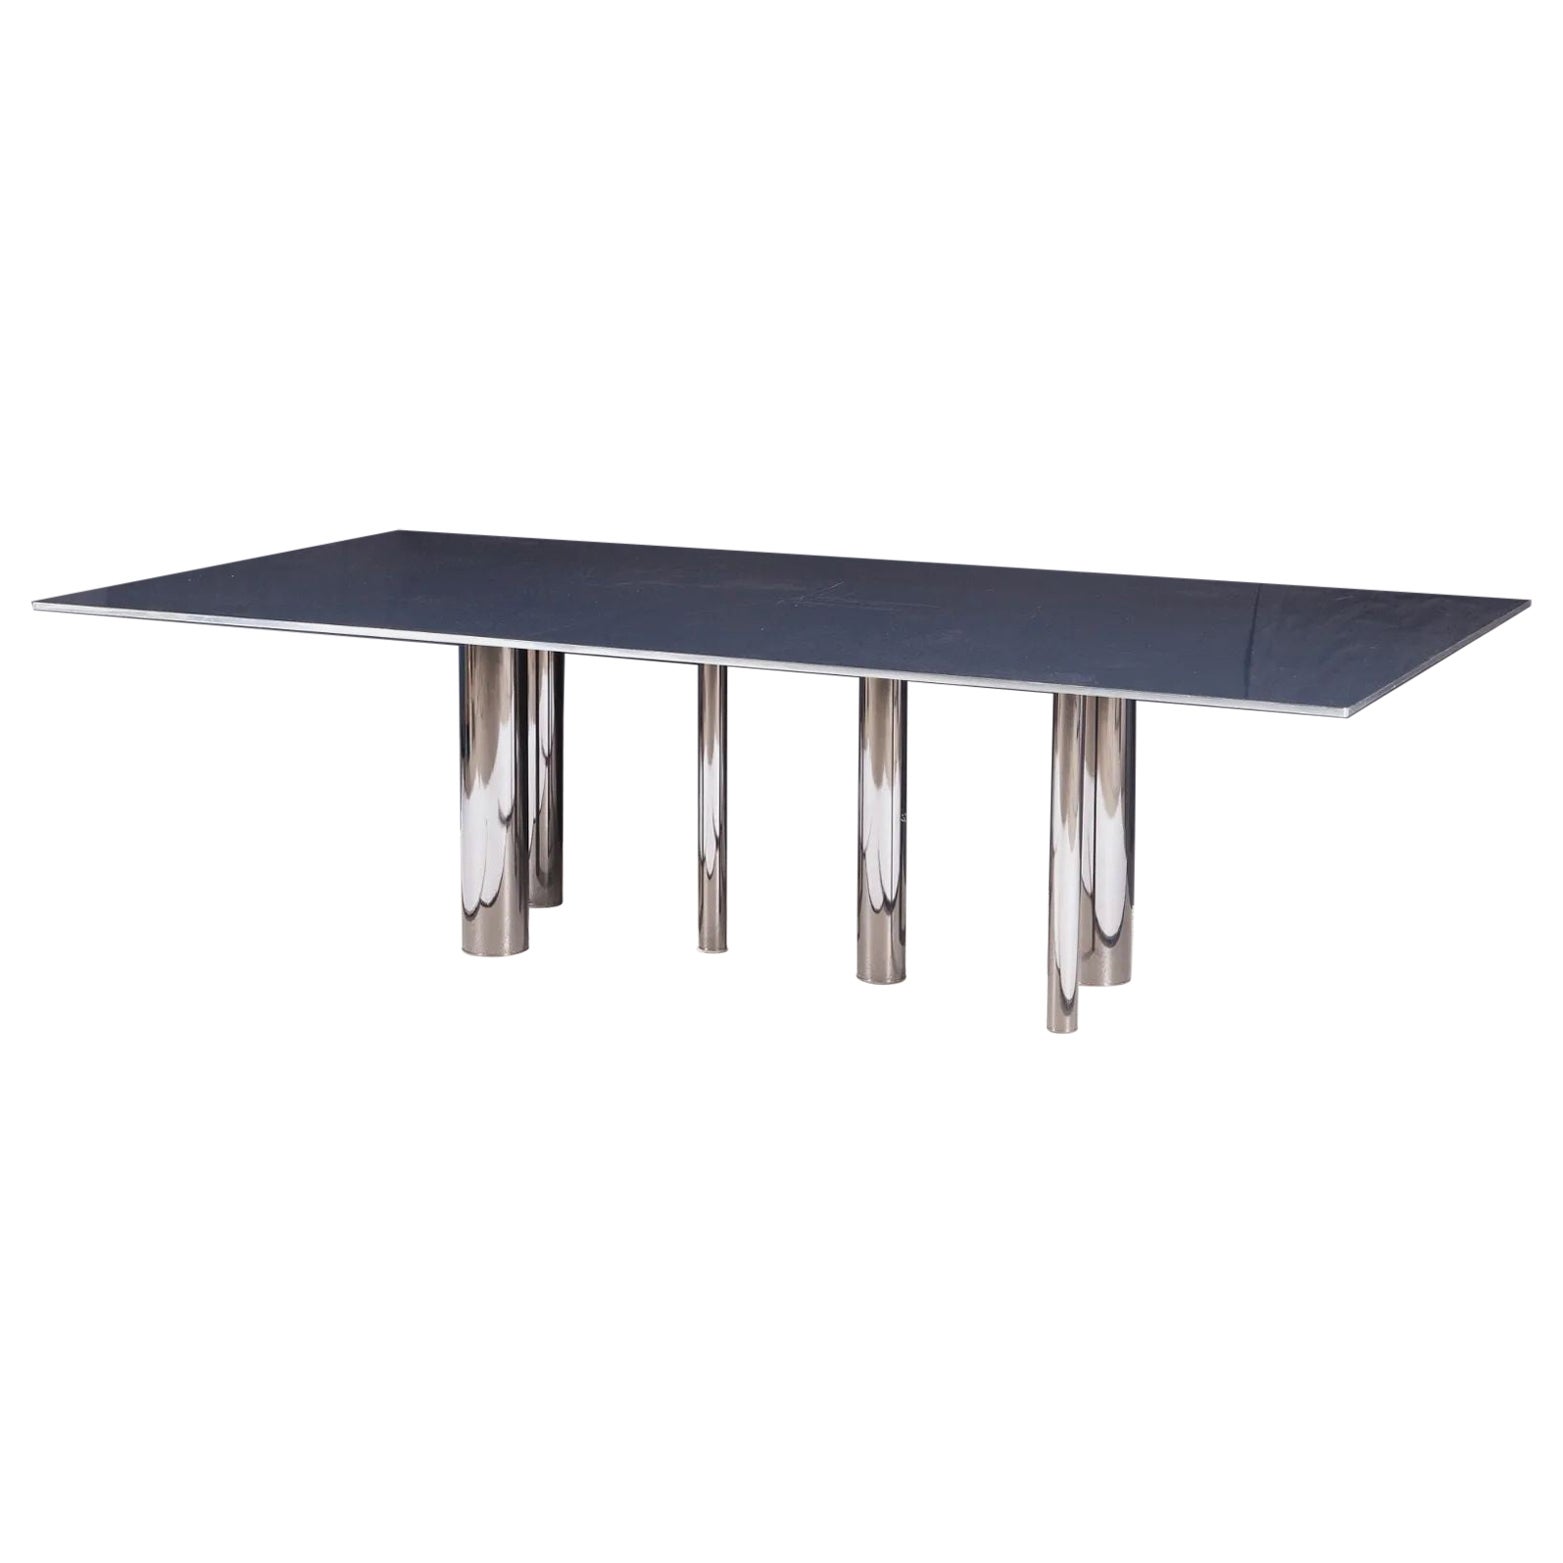 Martin Szekely, Contemporary, Limited Edition Dining Table, Steel, France, 2004 en vente